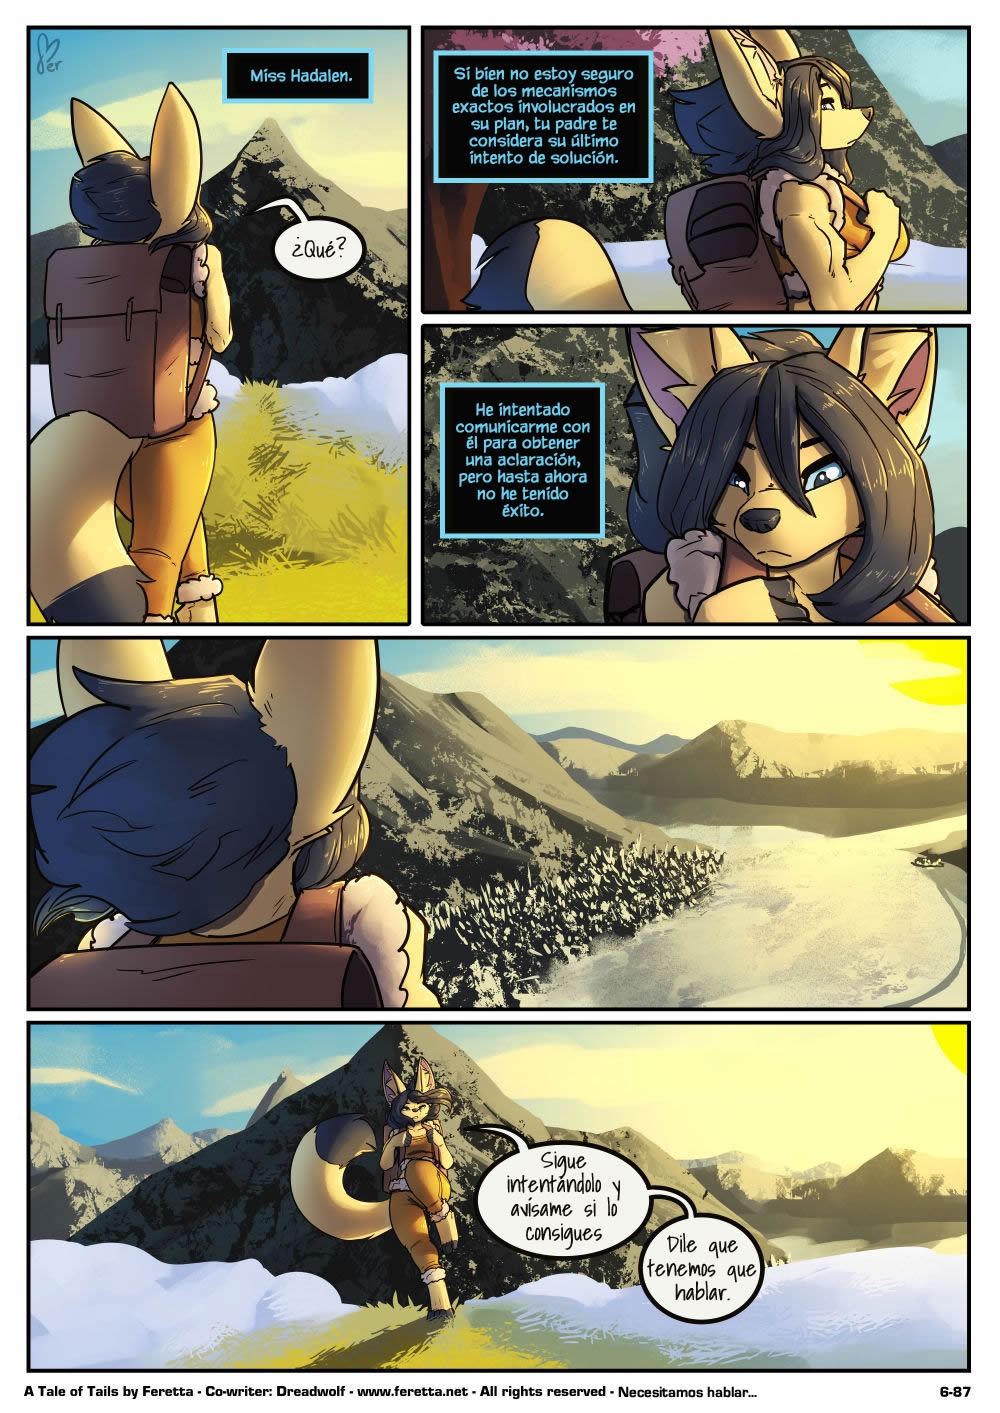 [Feretta] A Tale of Tails: Chapter 6 - Paths converge / Los caminos convergen [Spanish] [Red Fox Makkan] 87